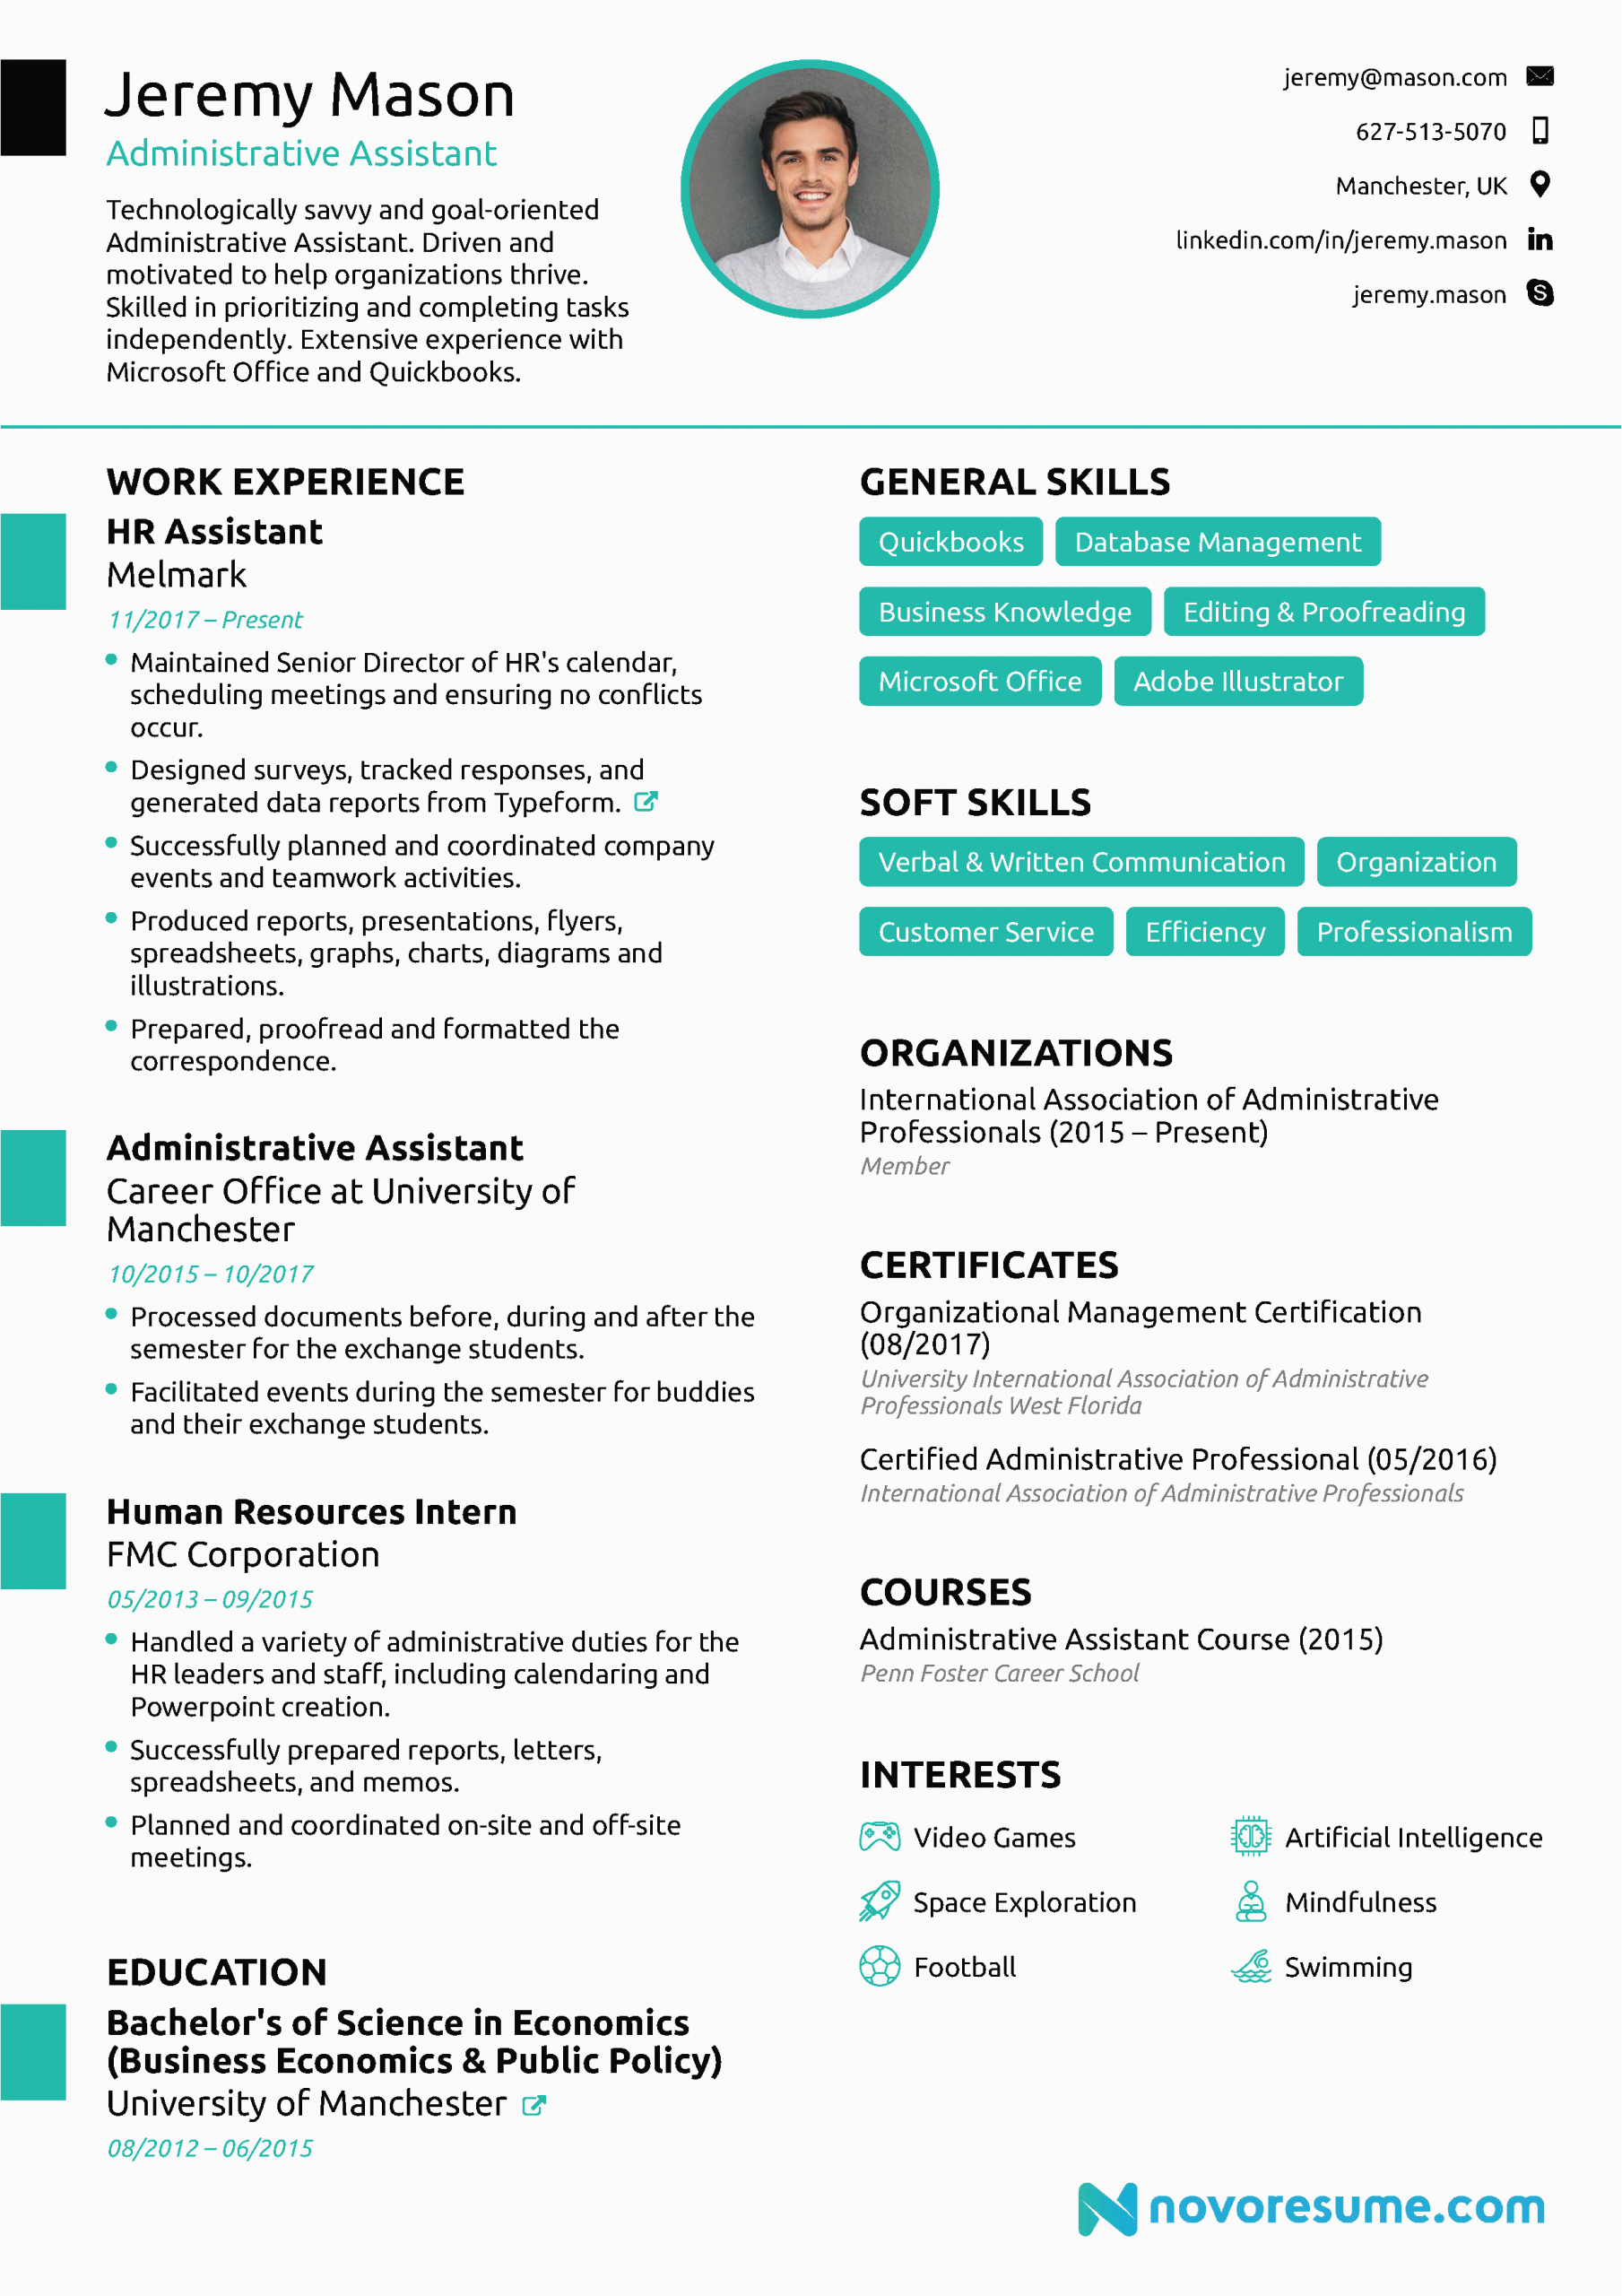 Best Resume Sample for Admin assistant Administrative assistant Resume [2021] Guide & Examples